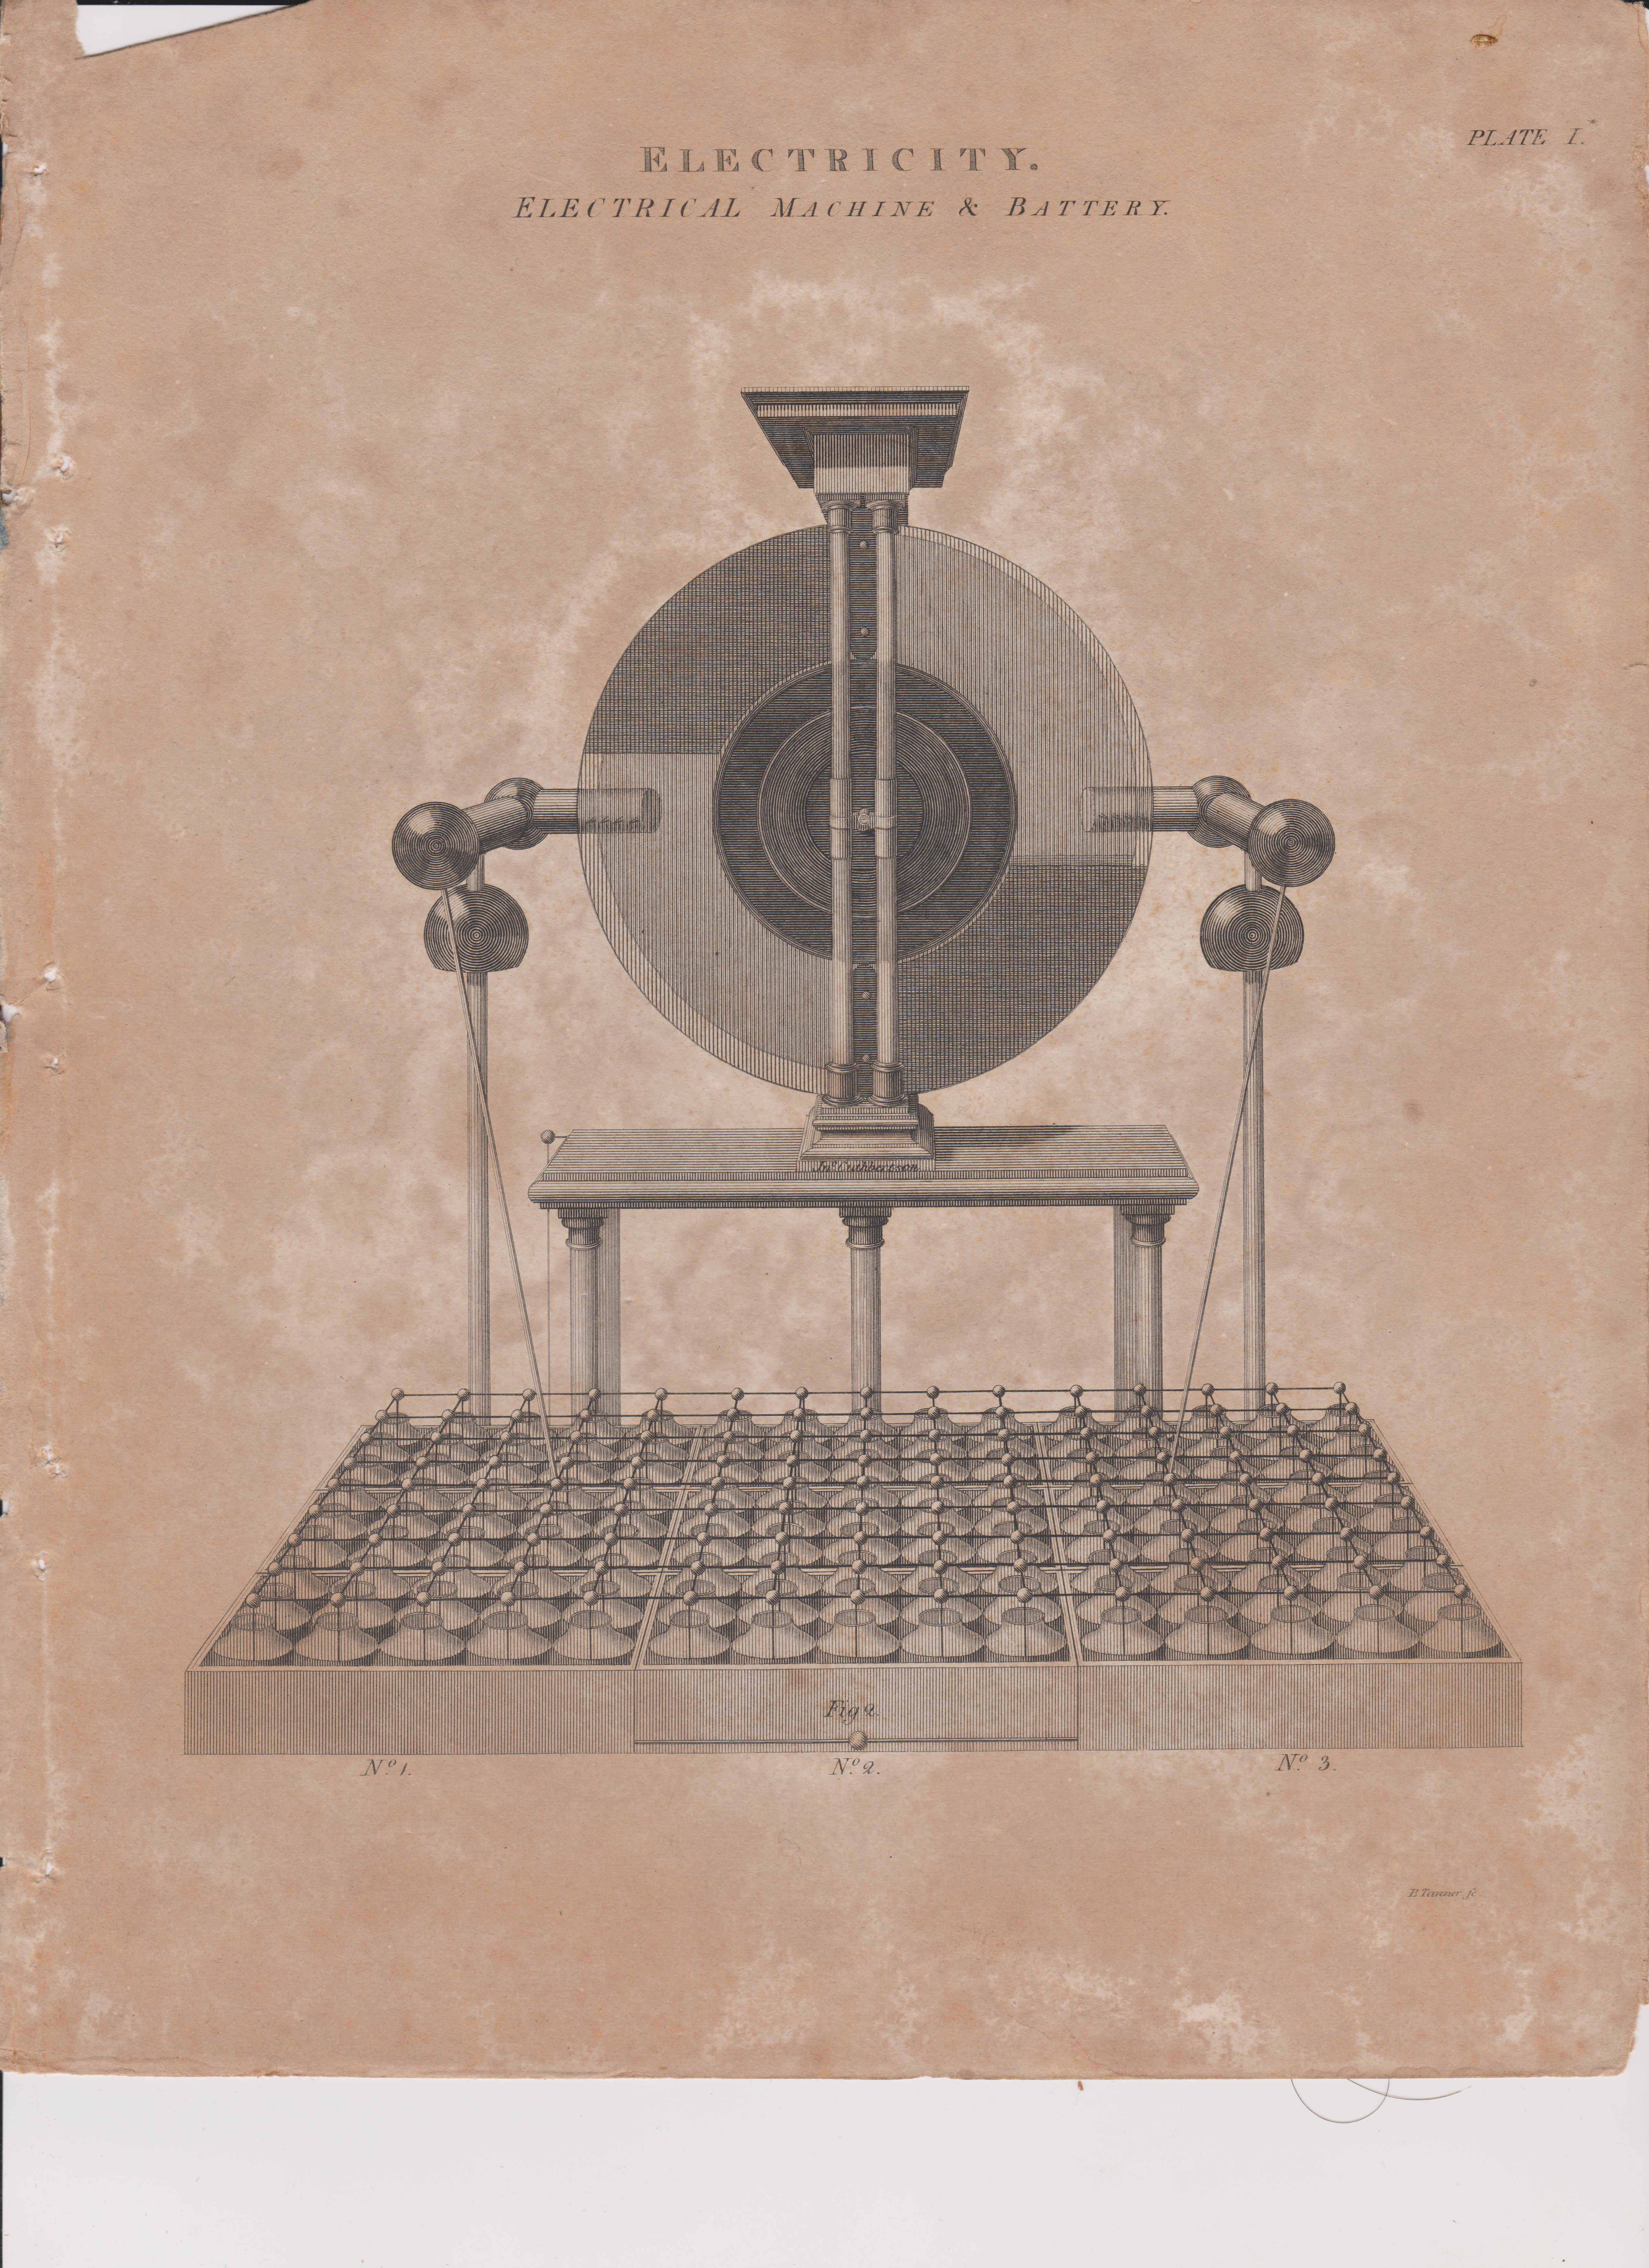 http://antiquemachinery.com/images-2019/1816-PLATE1-Static-electricity-generator.jpeg